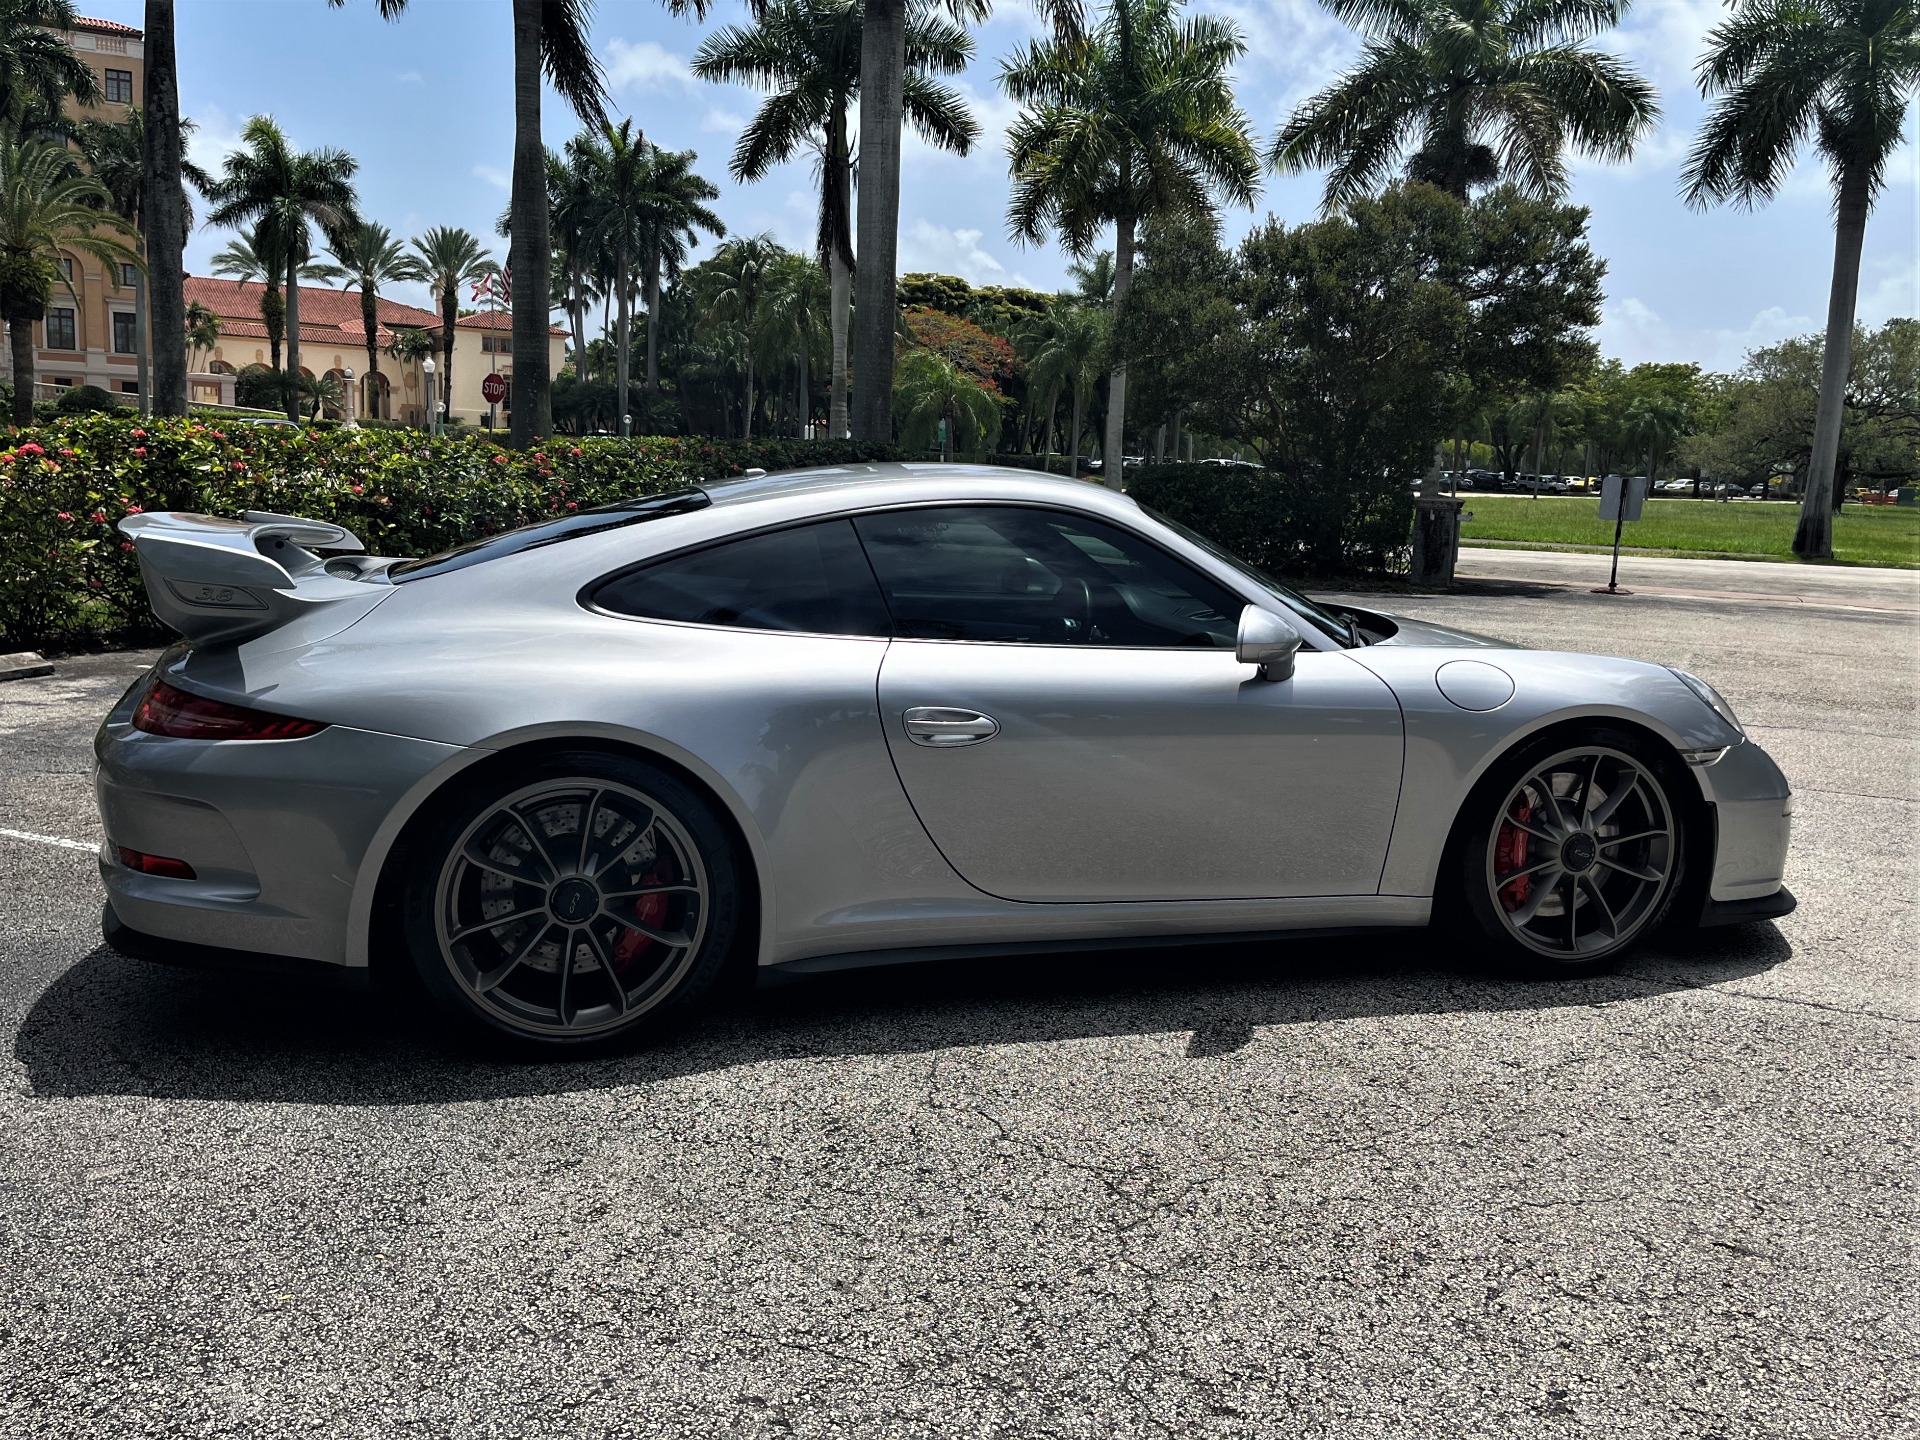 Used 2014 Porsche 911 GT3 for sale $143,850 at The Gables Sports Cars in Miami FL 33146 4